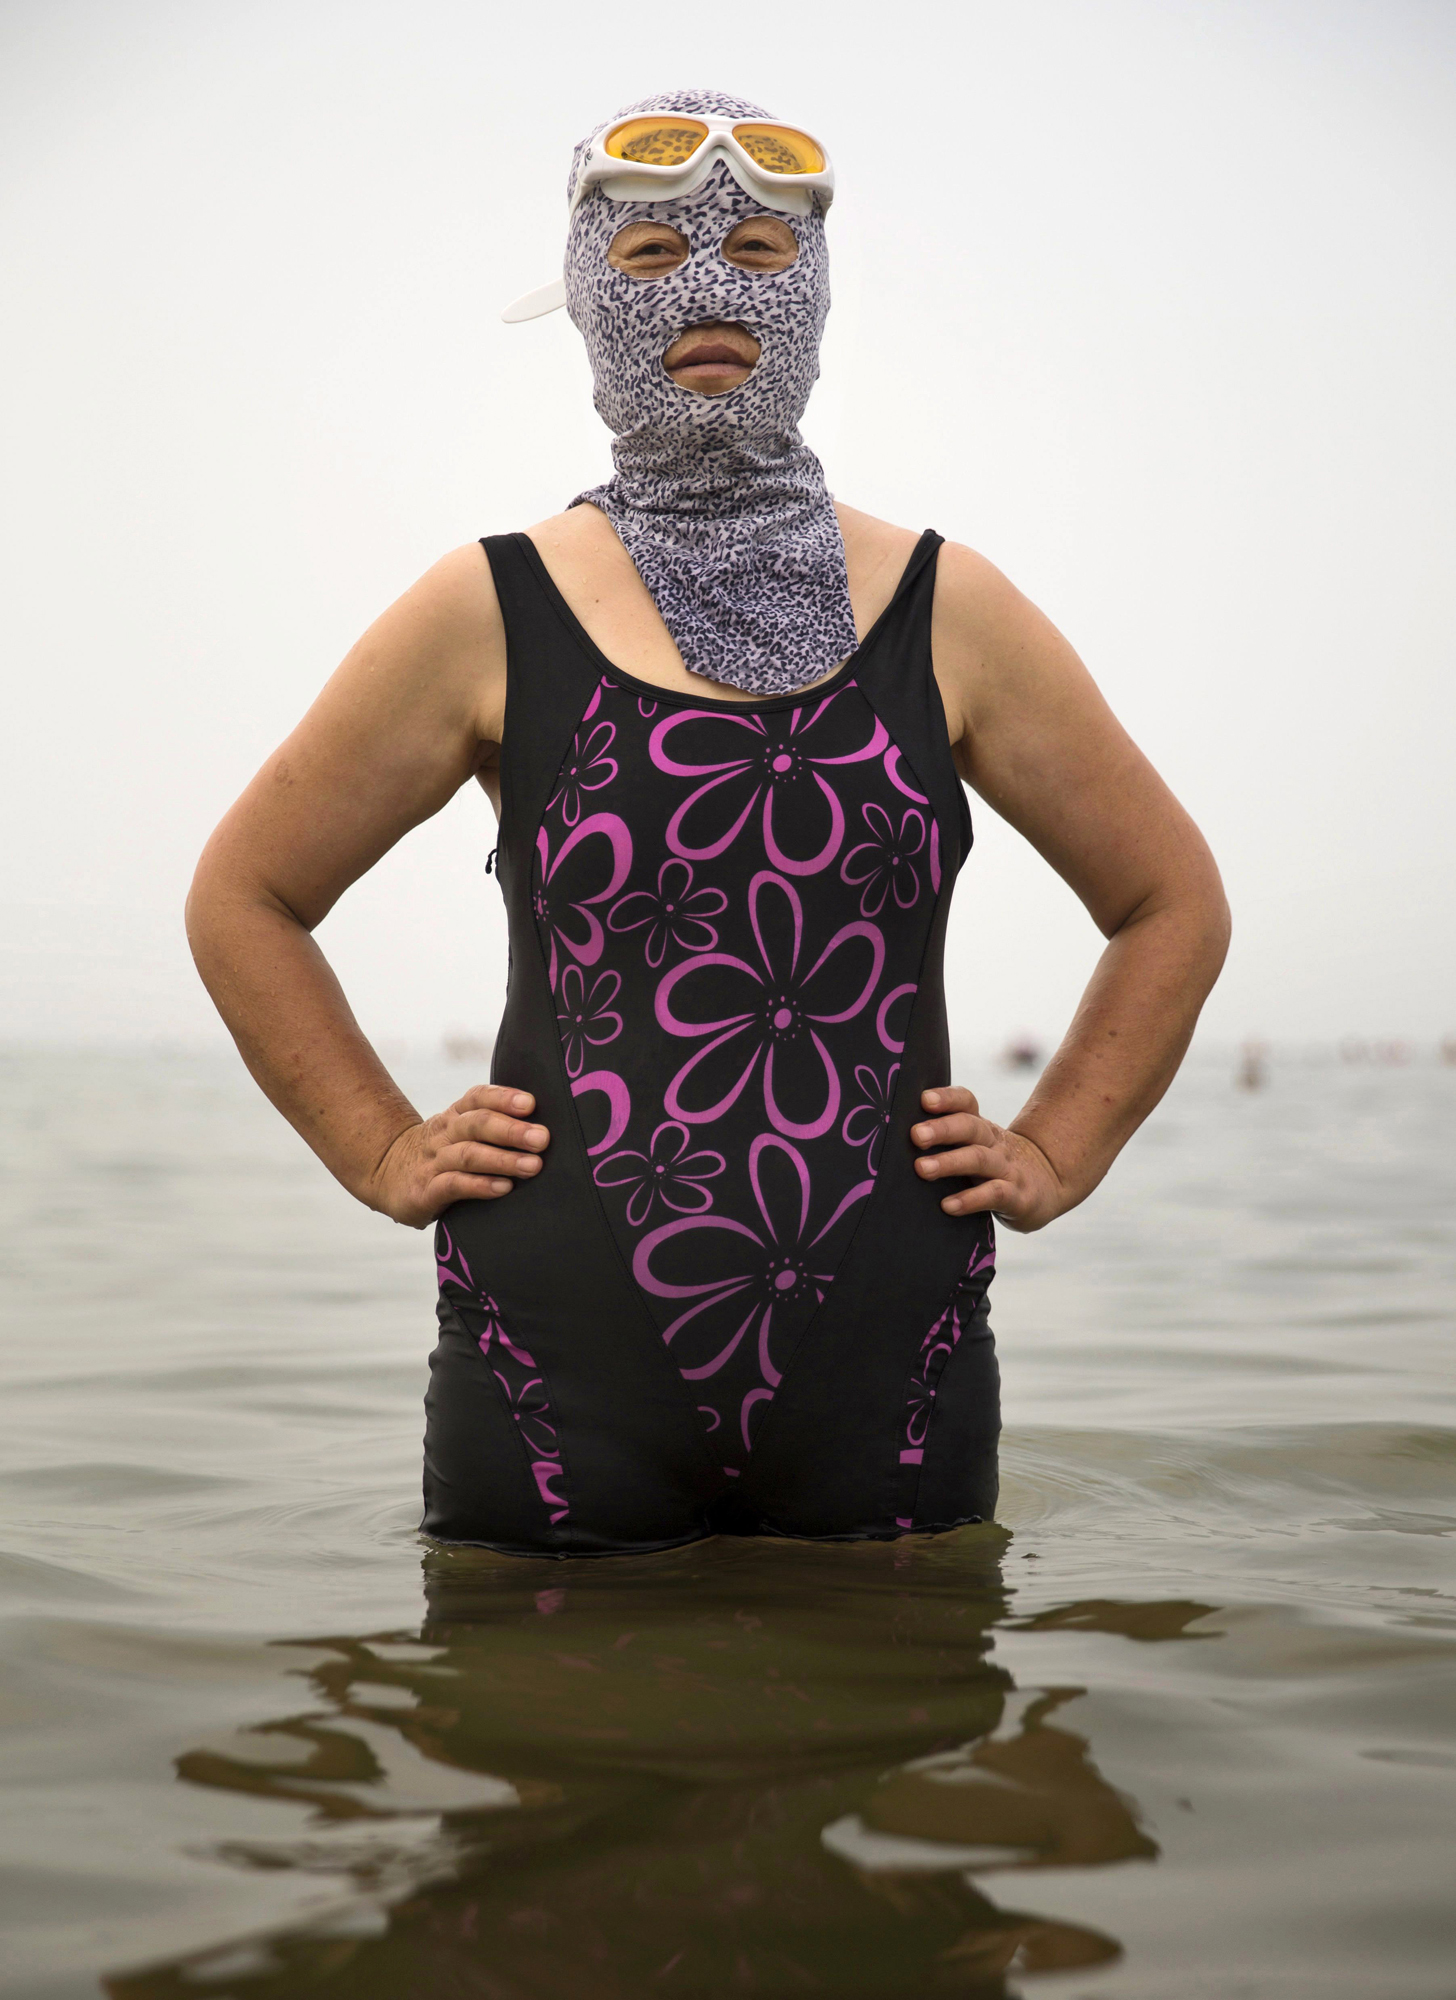 A woman wears a facekini as she poses on Aug. 21, 2014, in the Yellow Sea in Qingdao.